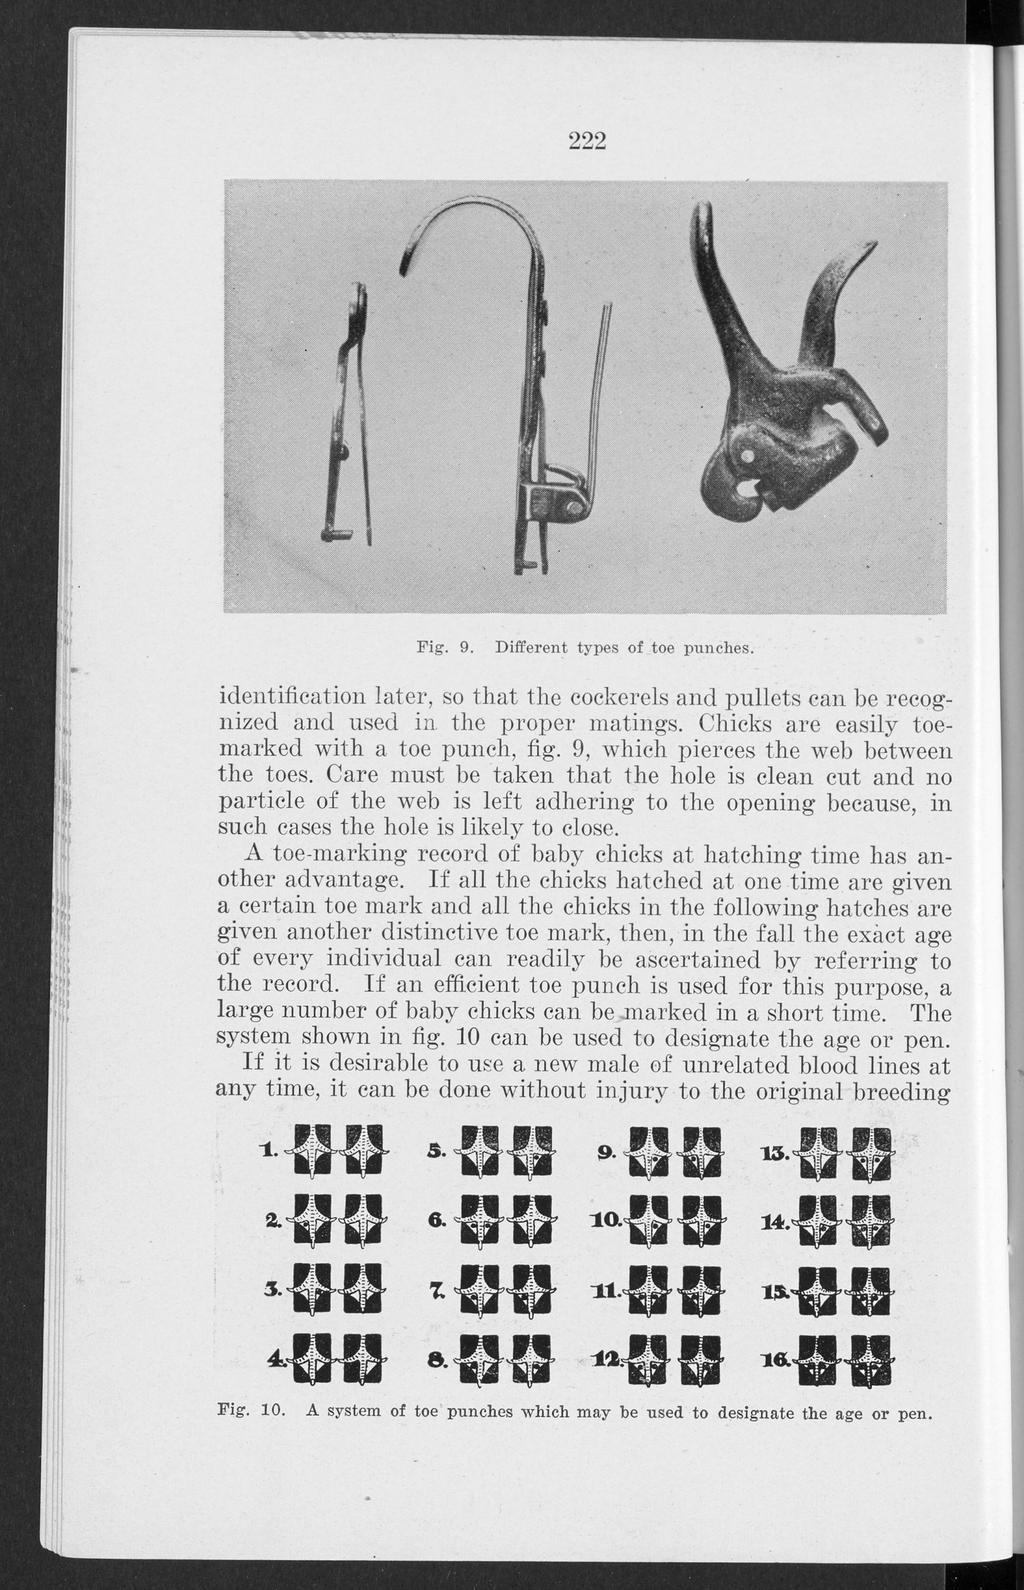 Bulletin, Vol. 22 [1928], No. 258, Art. 1 222 Fig. 9. Different types of toe punches. identification later, so that the cockerels and pullets can be recognized and used in the proper matings.